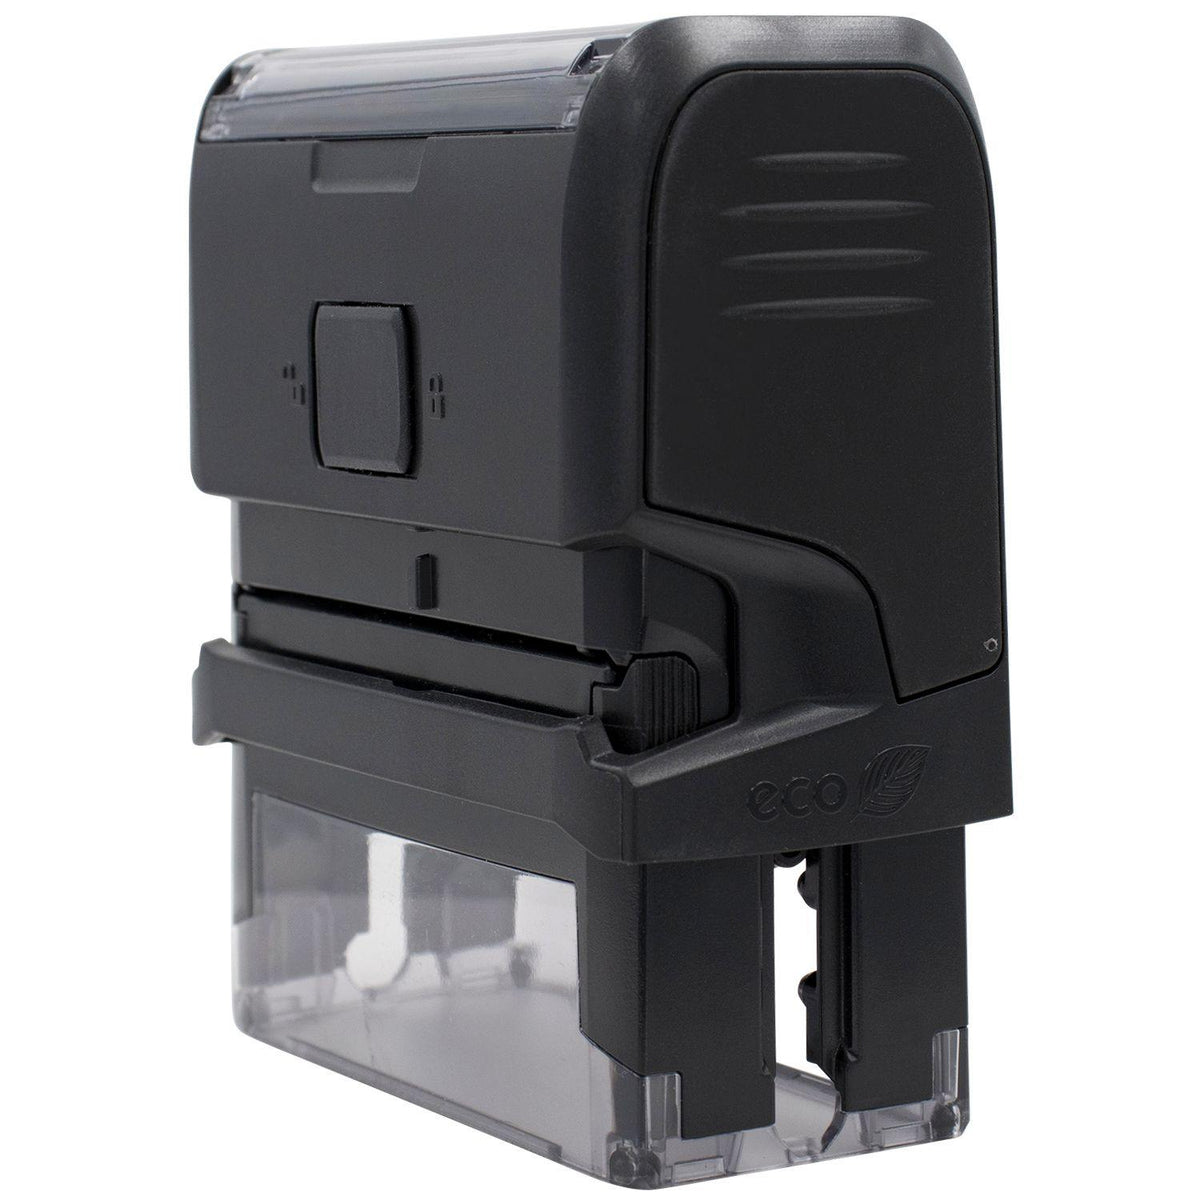 Self-Inking Brilliant Stamp - Engineer Seal Stamps - Brand_Trodat, Impression Size_Small, Stamp Type_Self-Inking Stamp